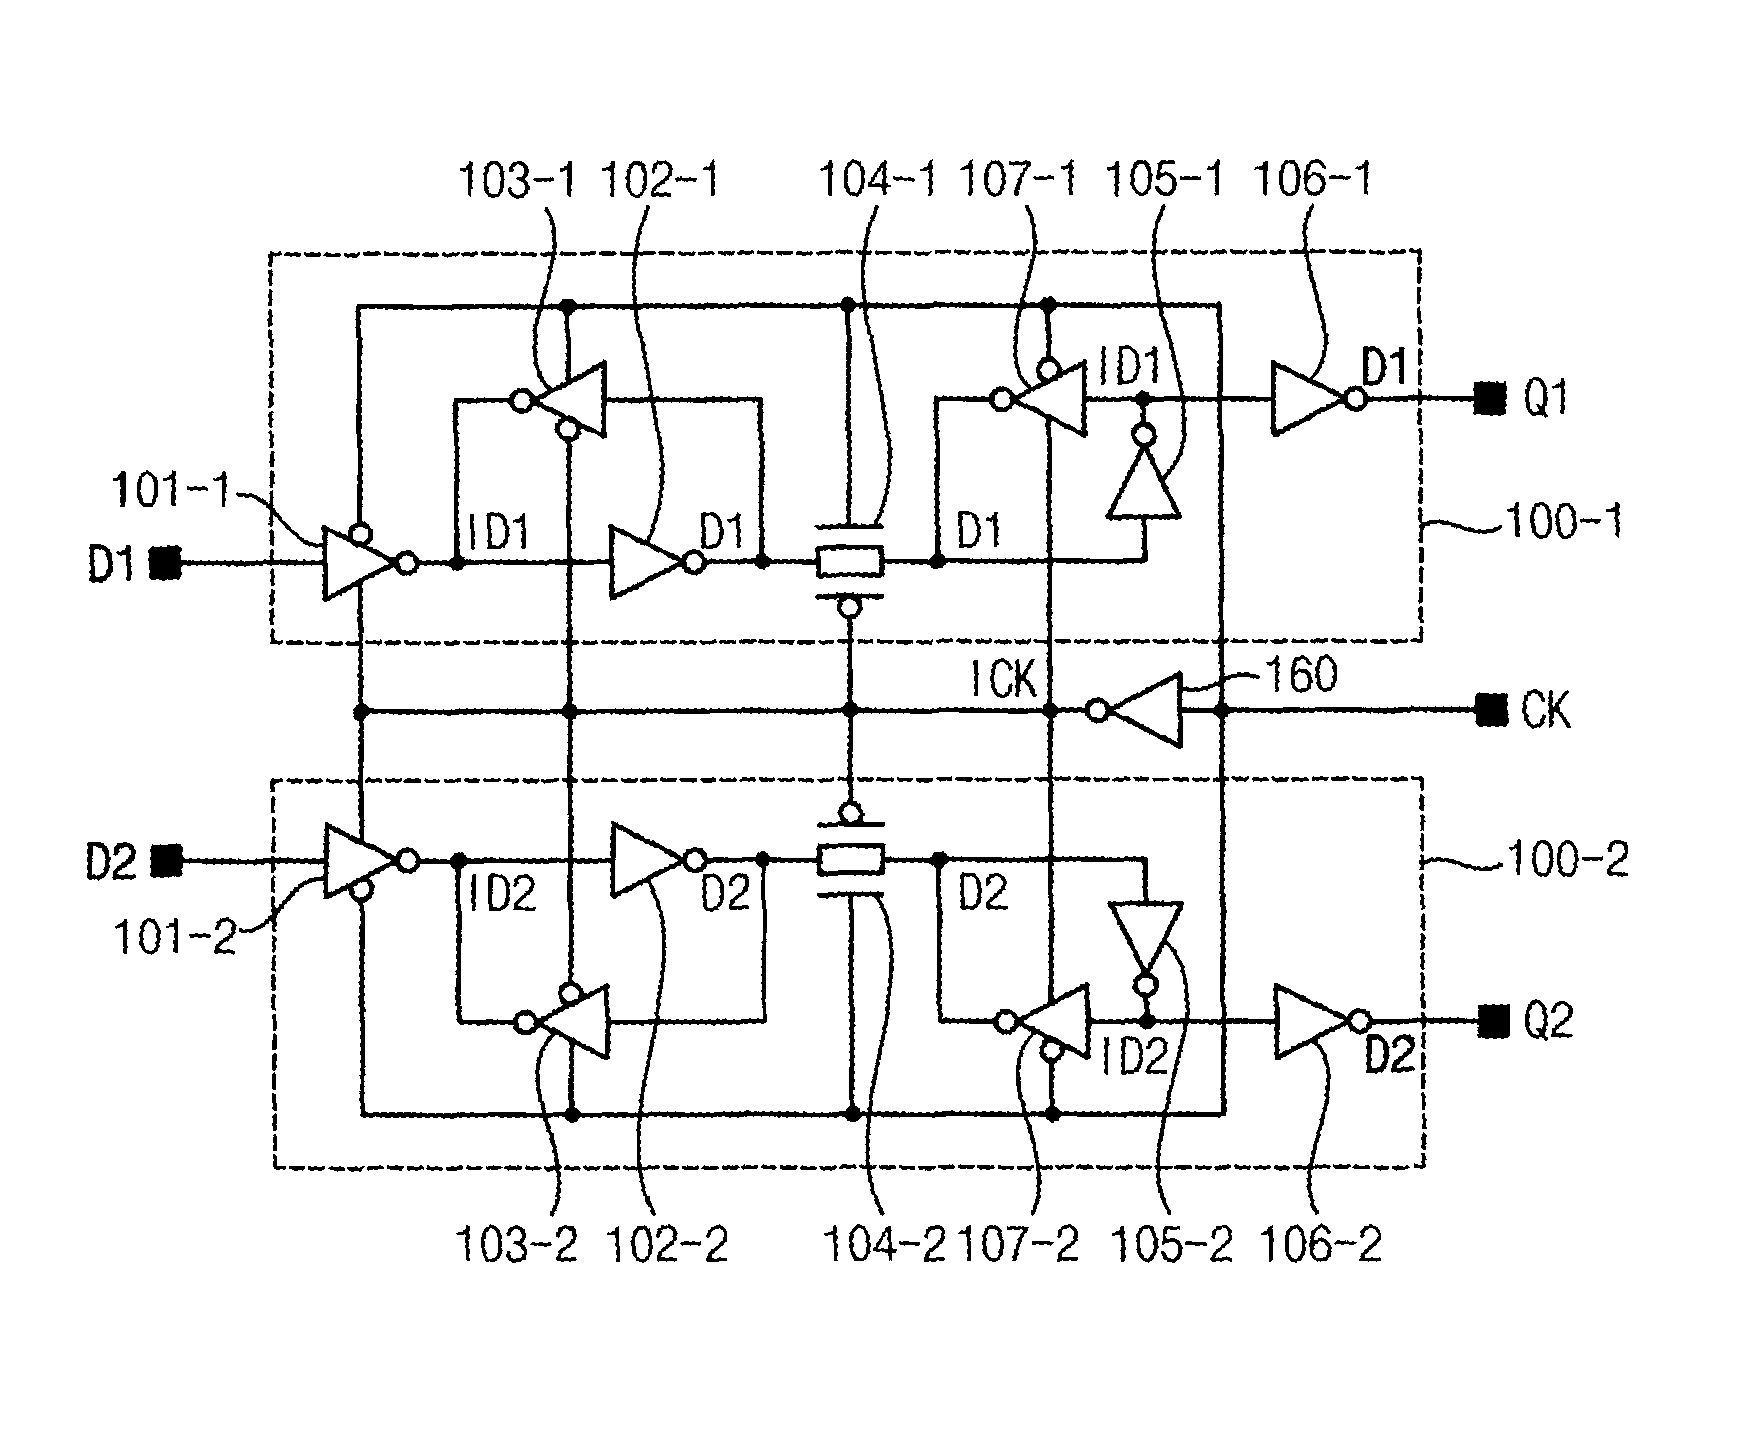 Multi-bit flip-flops and scan chain circuits